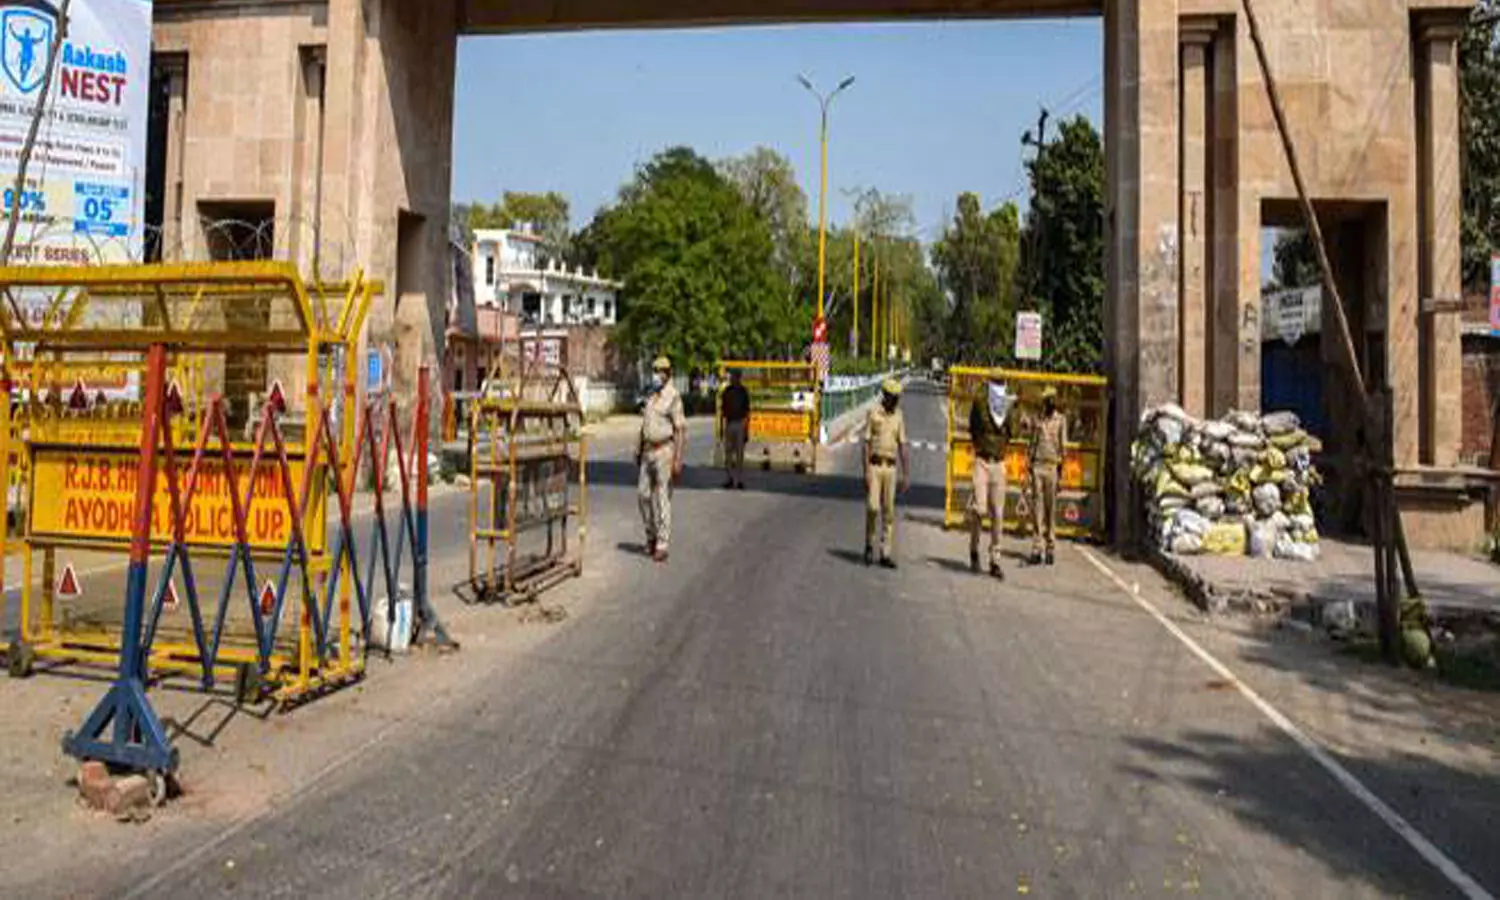 After Delhi, UP Govt to impose 10-day Lockdown as COVID-19 cases surge